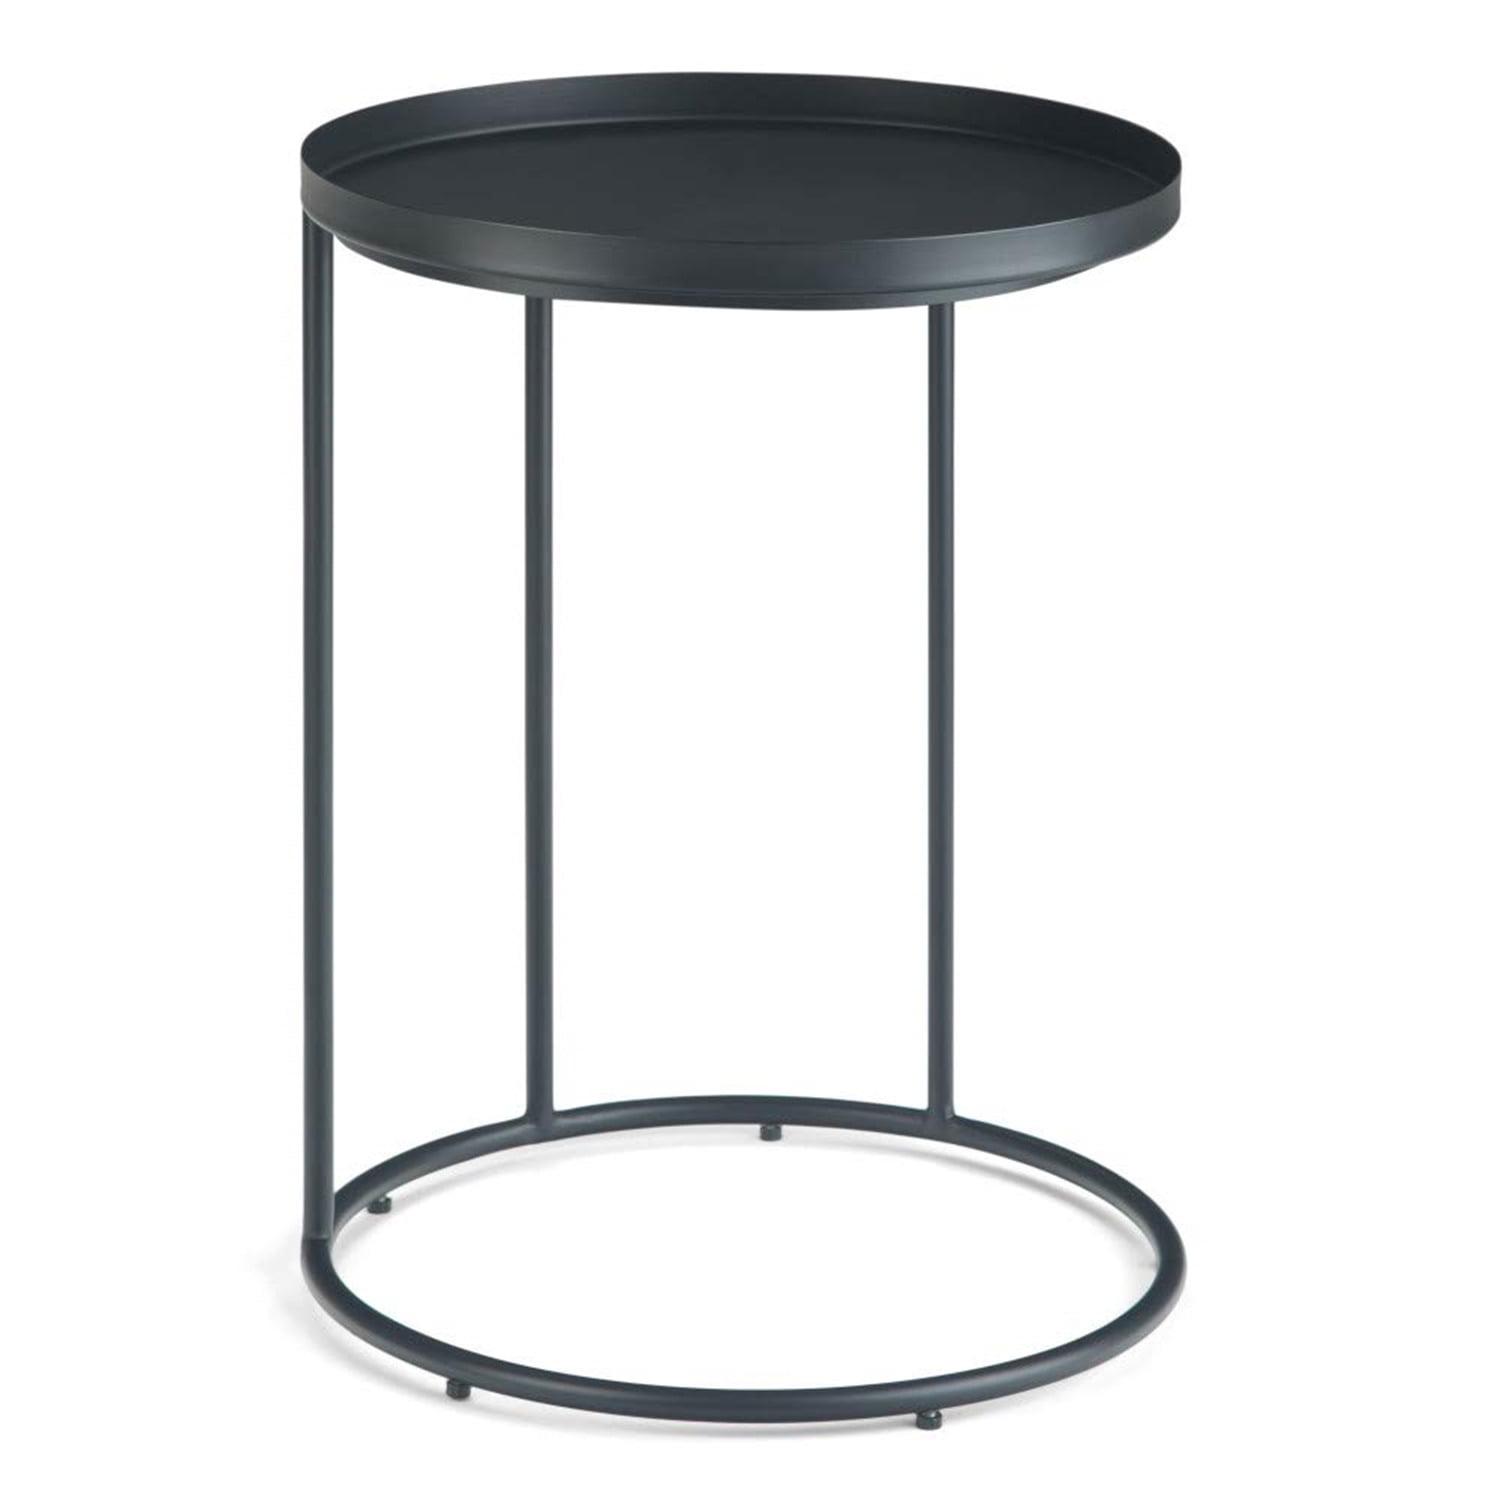 Monet 18" Round Black Metal Industrial Side Table with Storage